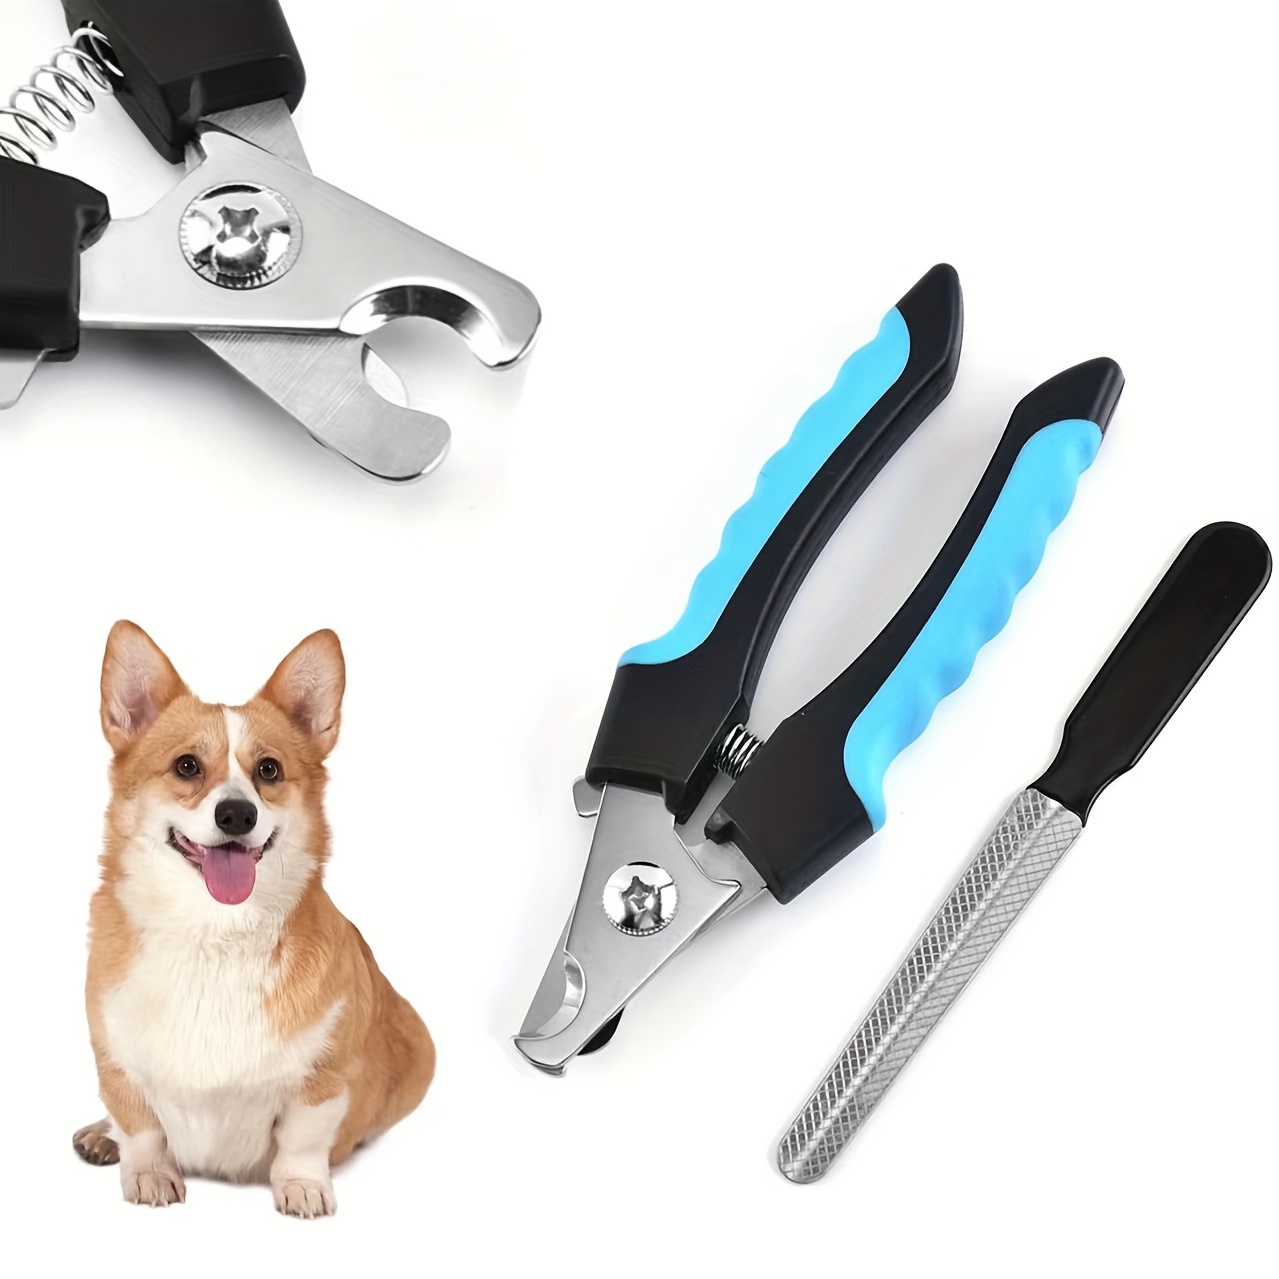 Pet Dog Cat Paws-Claw Clippers Nail Scissors Trimmer Plier German Quality